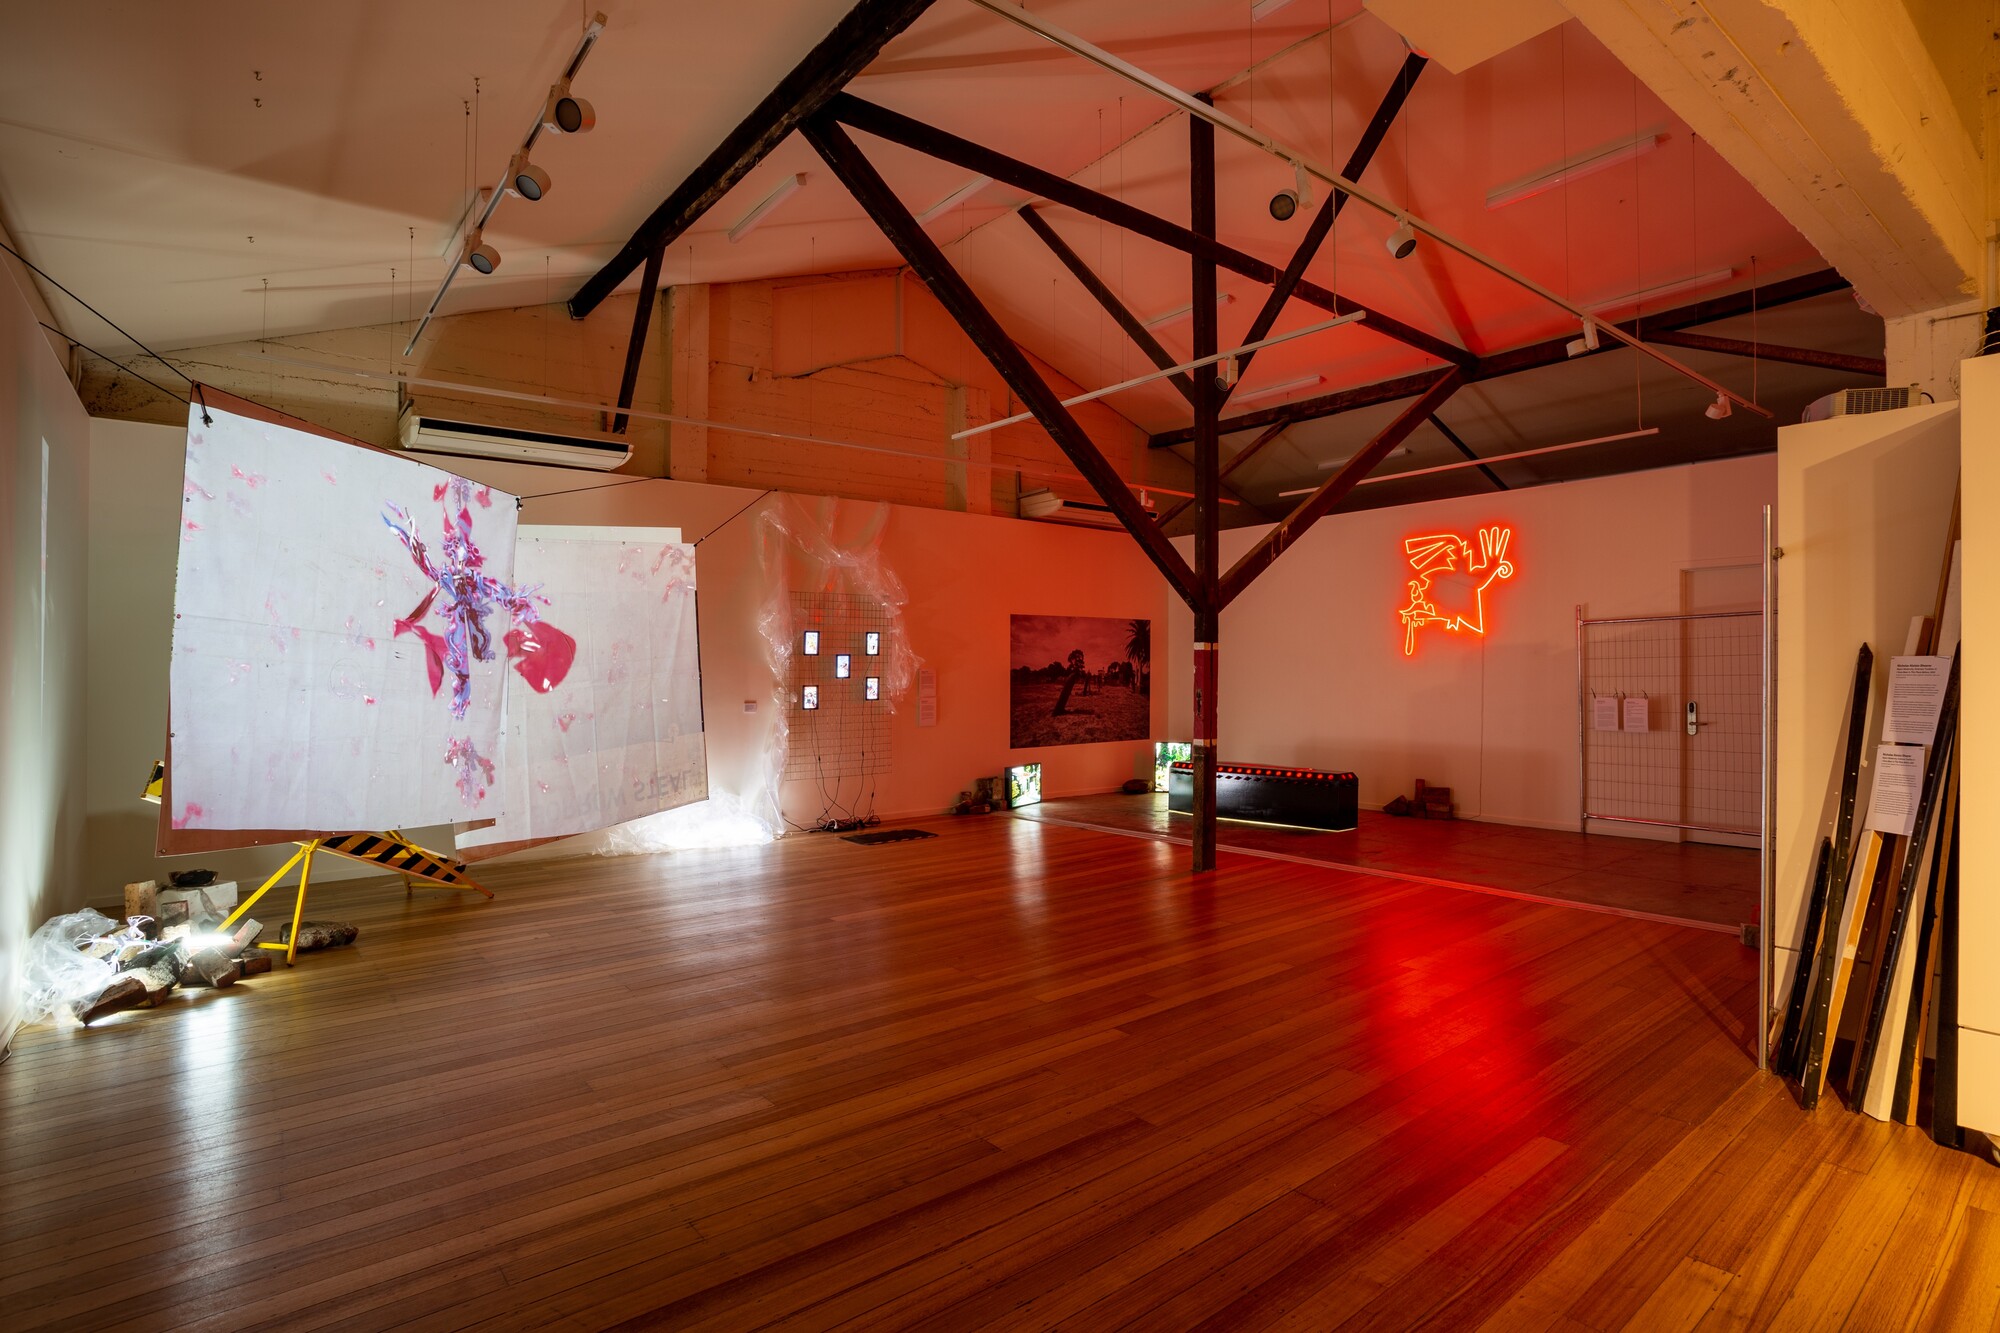 Installation view of <em>Aeon Resurrection</em>, 2022. Huntrezz Janos, <em>video,</em> 2022. 3D video animation; Huntrezz Janos, <em>face filters</em>, 2022. Virtual and augmented reality face filters; Diego Ramirez, <em>Eternal Arrival,</em> 2019. Coffin-shaped lightbox; Diego Ramirez, <em>The Infinity of The Past</em>, 2019. Neon; Diego Ramirez, <em>i want 2 die in mexican soil, so please don’t kill me yet,</em> 2022. Wallpaper; Diego Ramirez, <em>when you arrive i am the cat that loves a dog</em>, 2022. Duratran in lightbox; Diego Ramirez, <em>when you leave i am the dog that loves a cat</em>, 2022. Duratran in lightbox. Courtesy the gallery. Photo: Lucy Foster